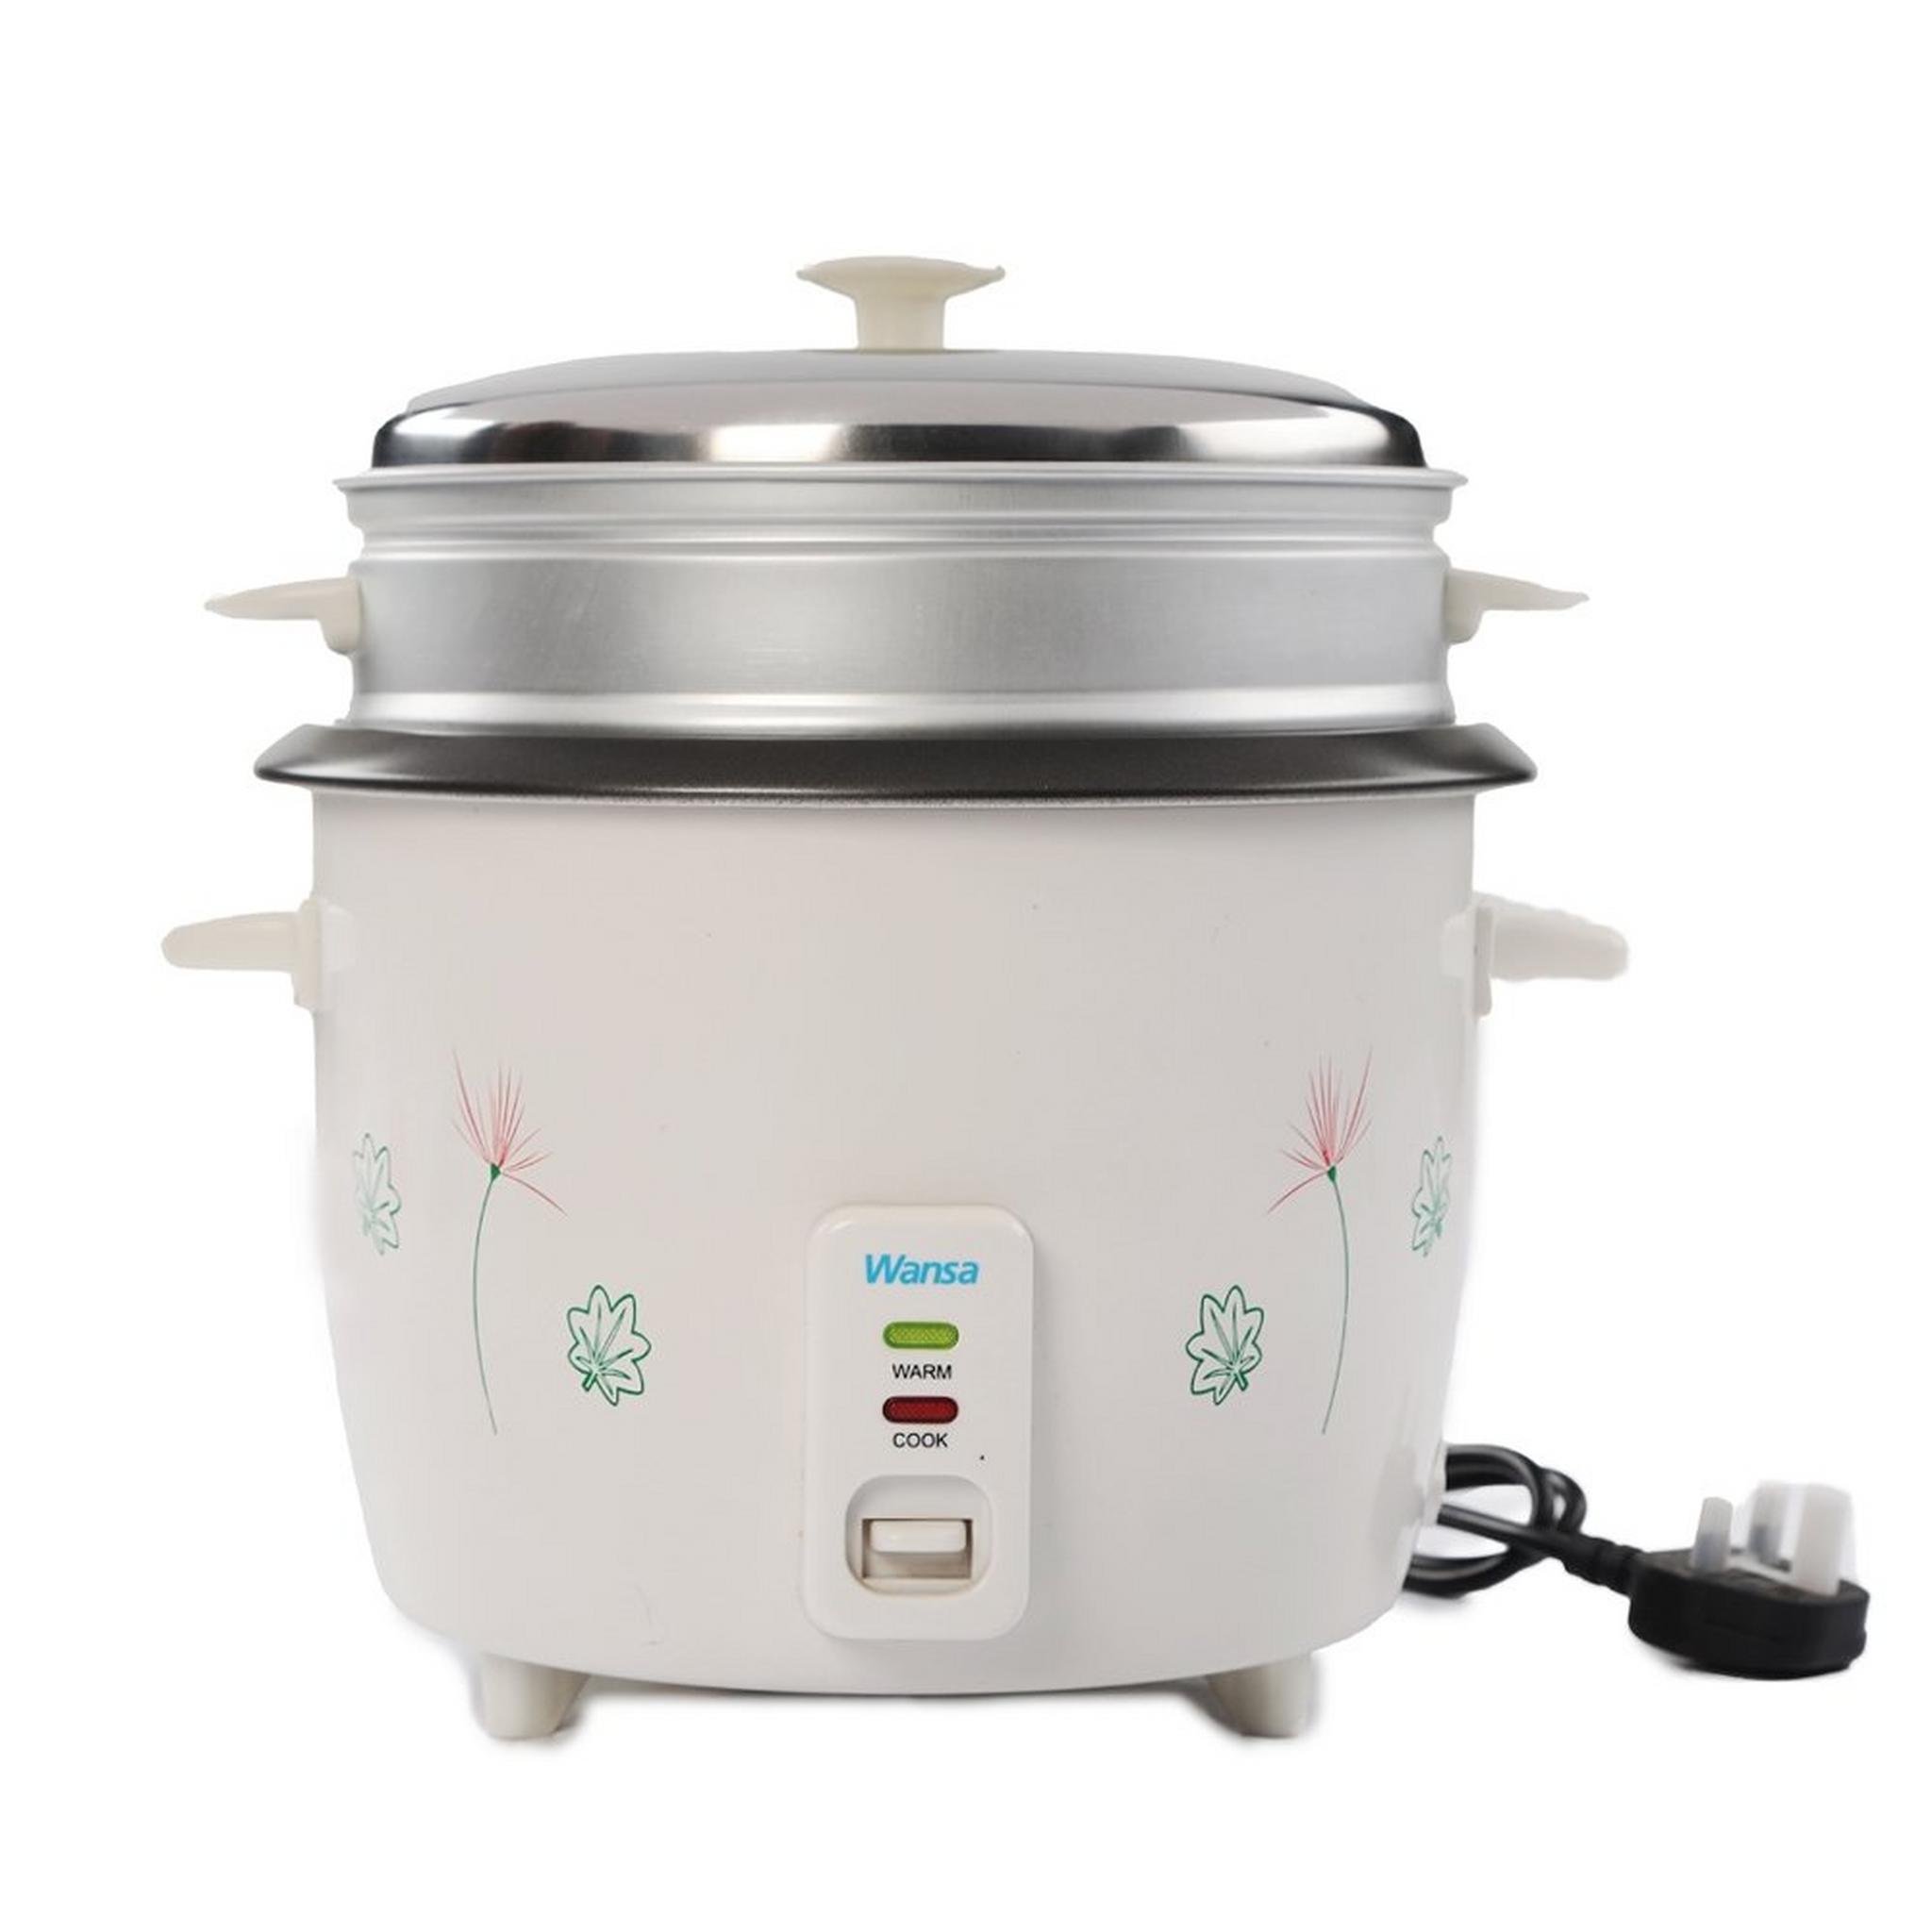 Wansa Rice Cooker, 900W, 2.5 Liters, TO-9802 - White